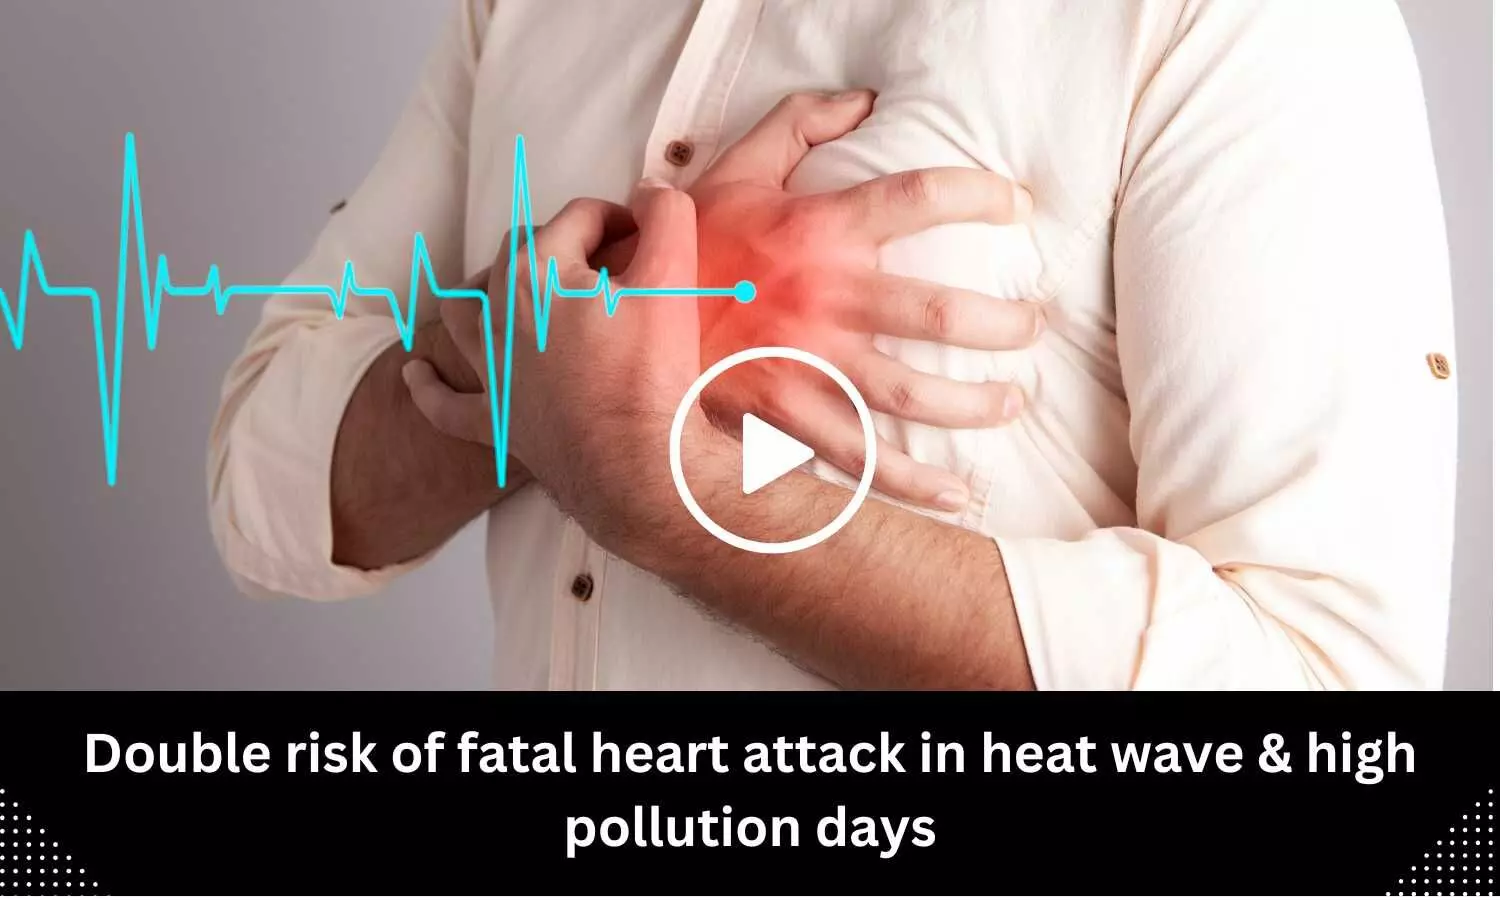 Double risk of fatal heart attack in heat wave & high pollution days